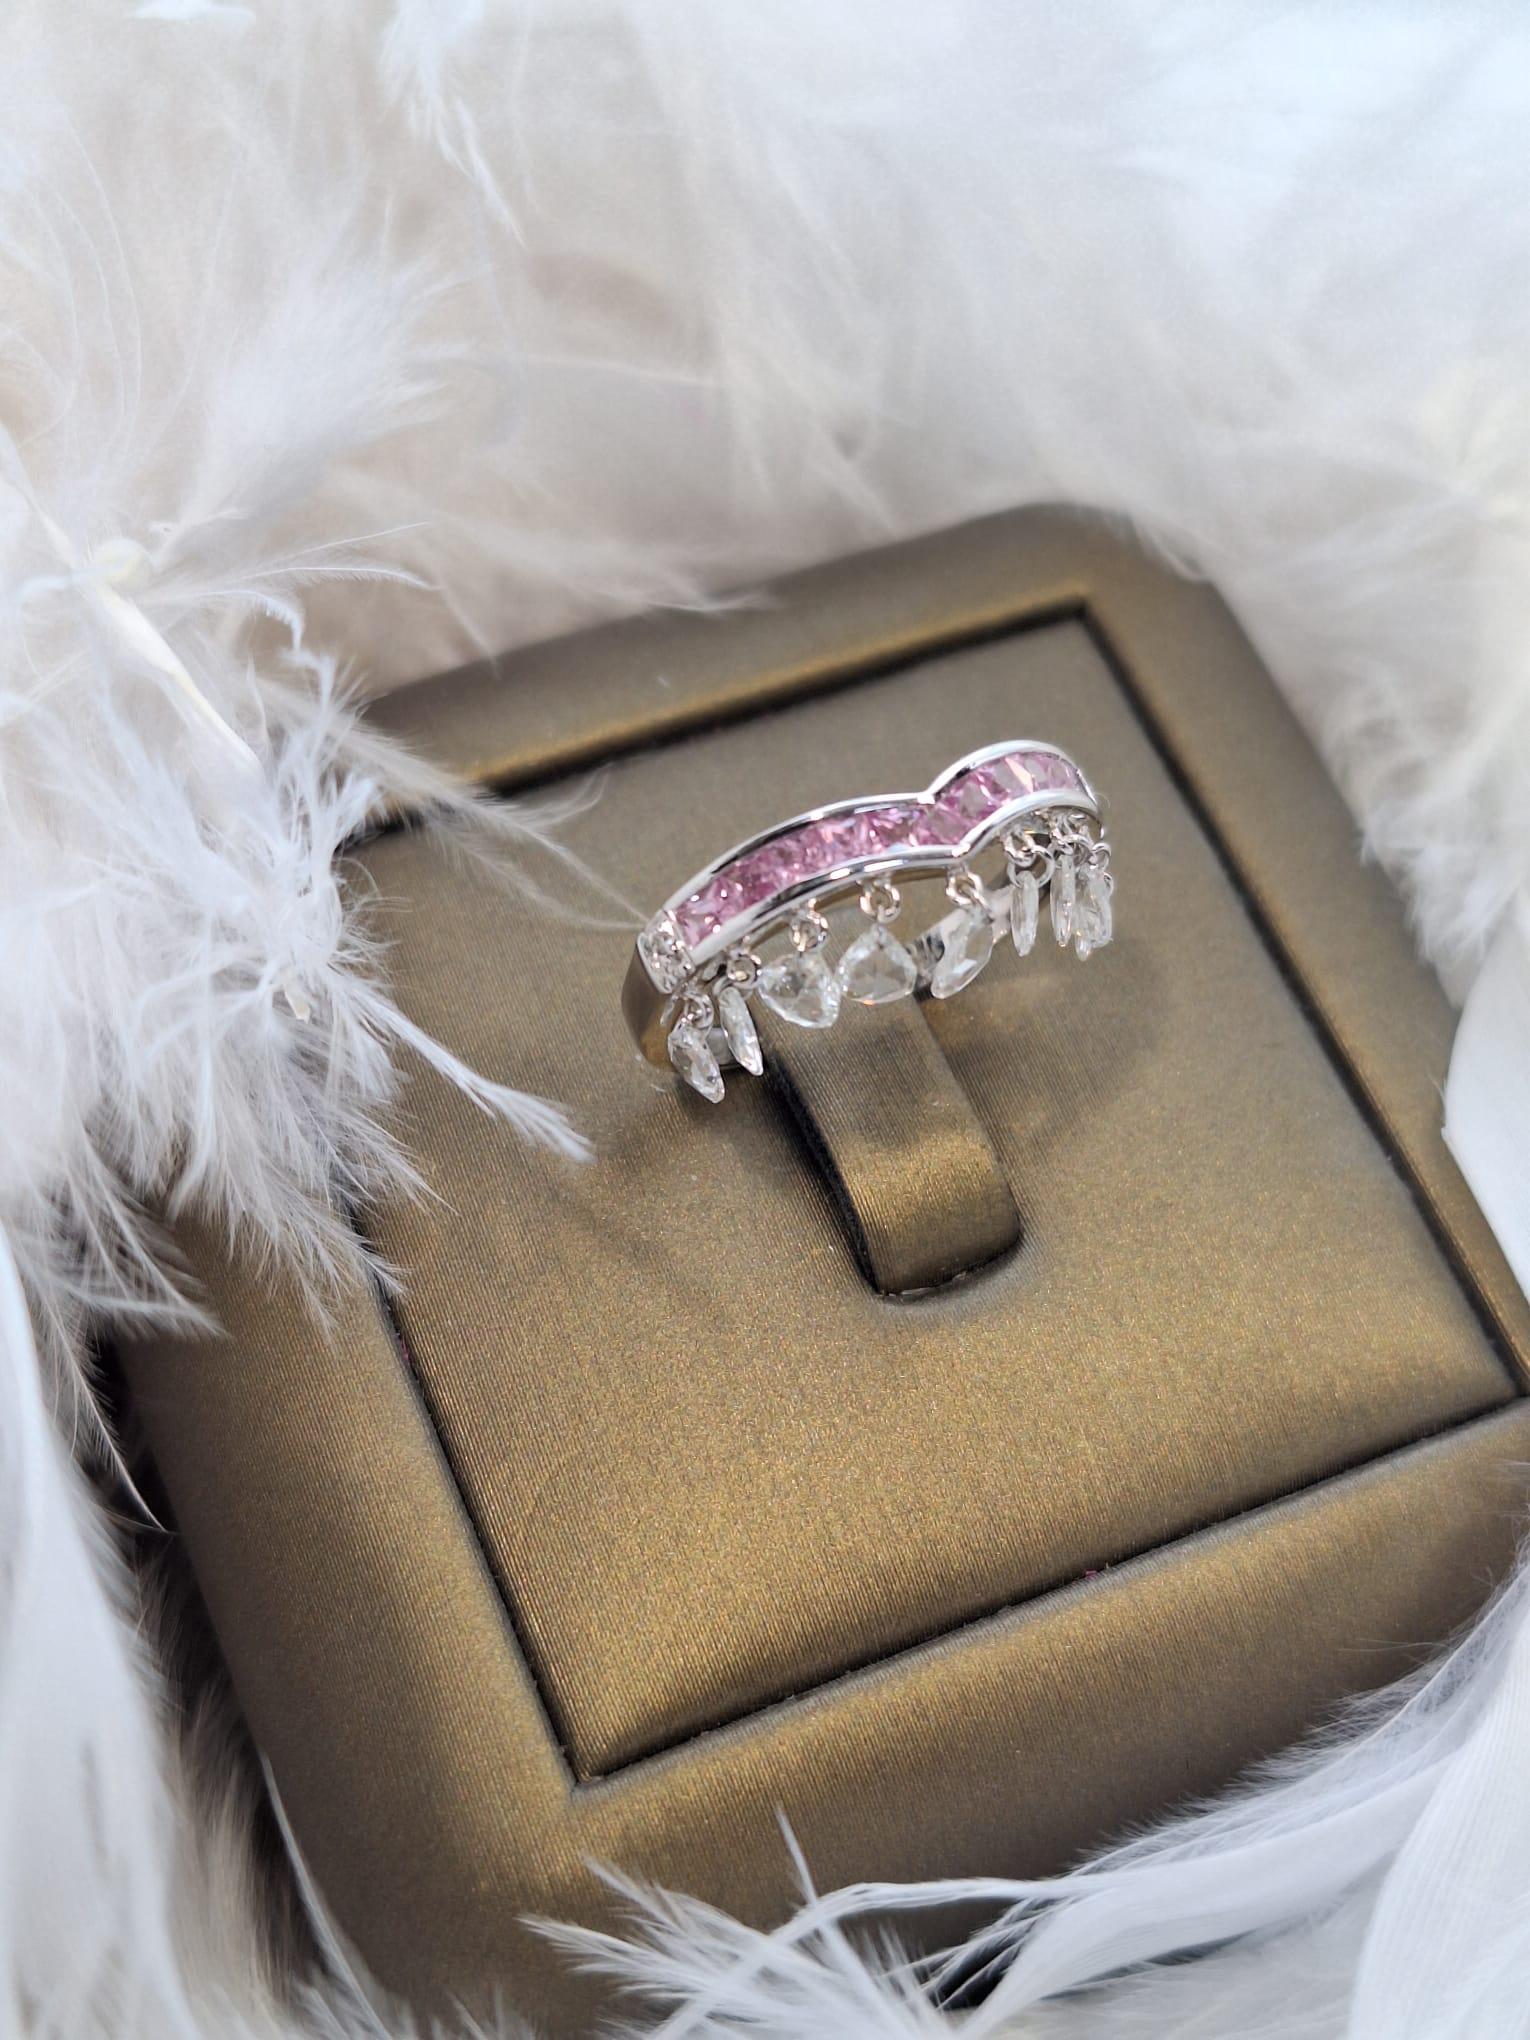 18K White Gold Diamond Ring with Pink Sapphire

Pink sapphires symbolize good fortune, power through hardships, intense love and compassion, and subtle elegance.

Diamonds symbolise clarity and purity, also represent innocence, strength, and true